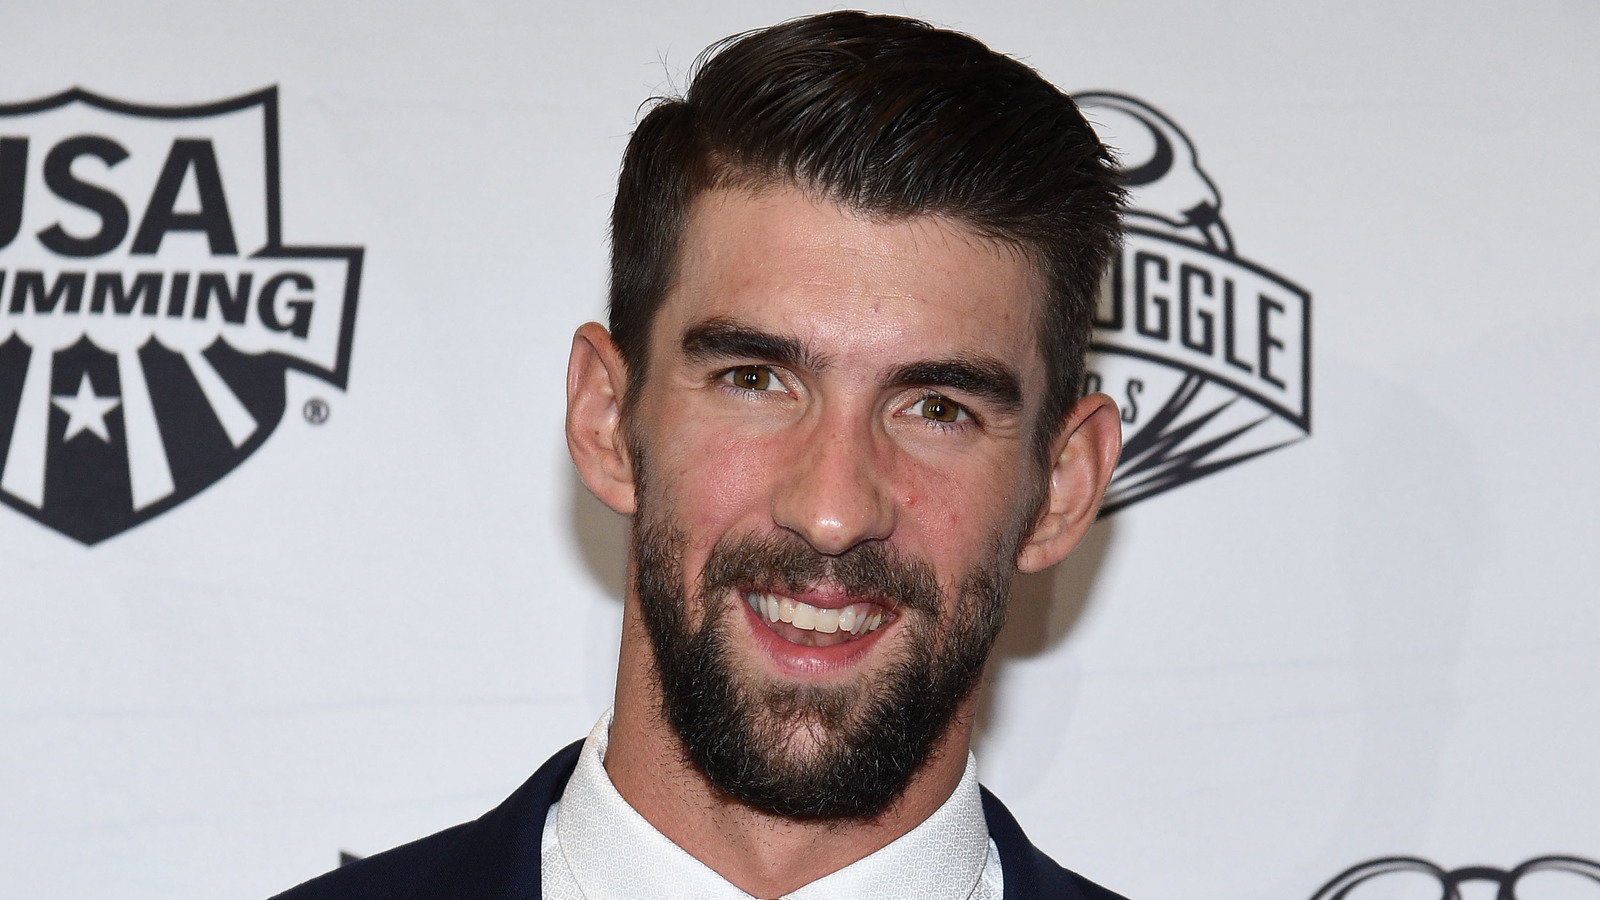 Inside Michael Phelps' Battle With Depression